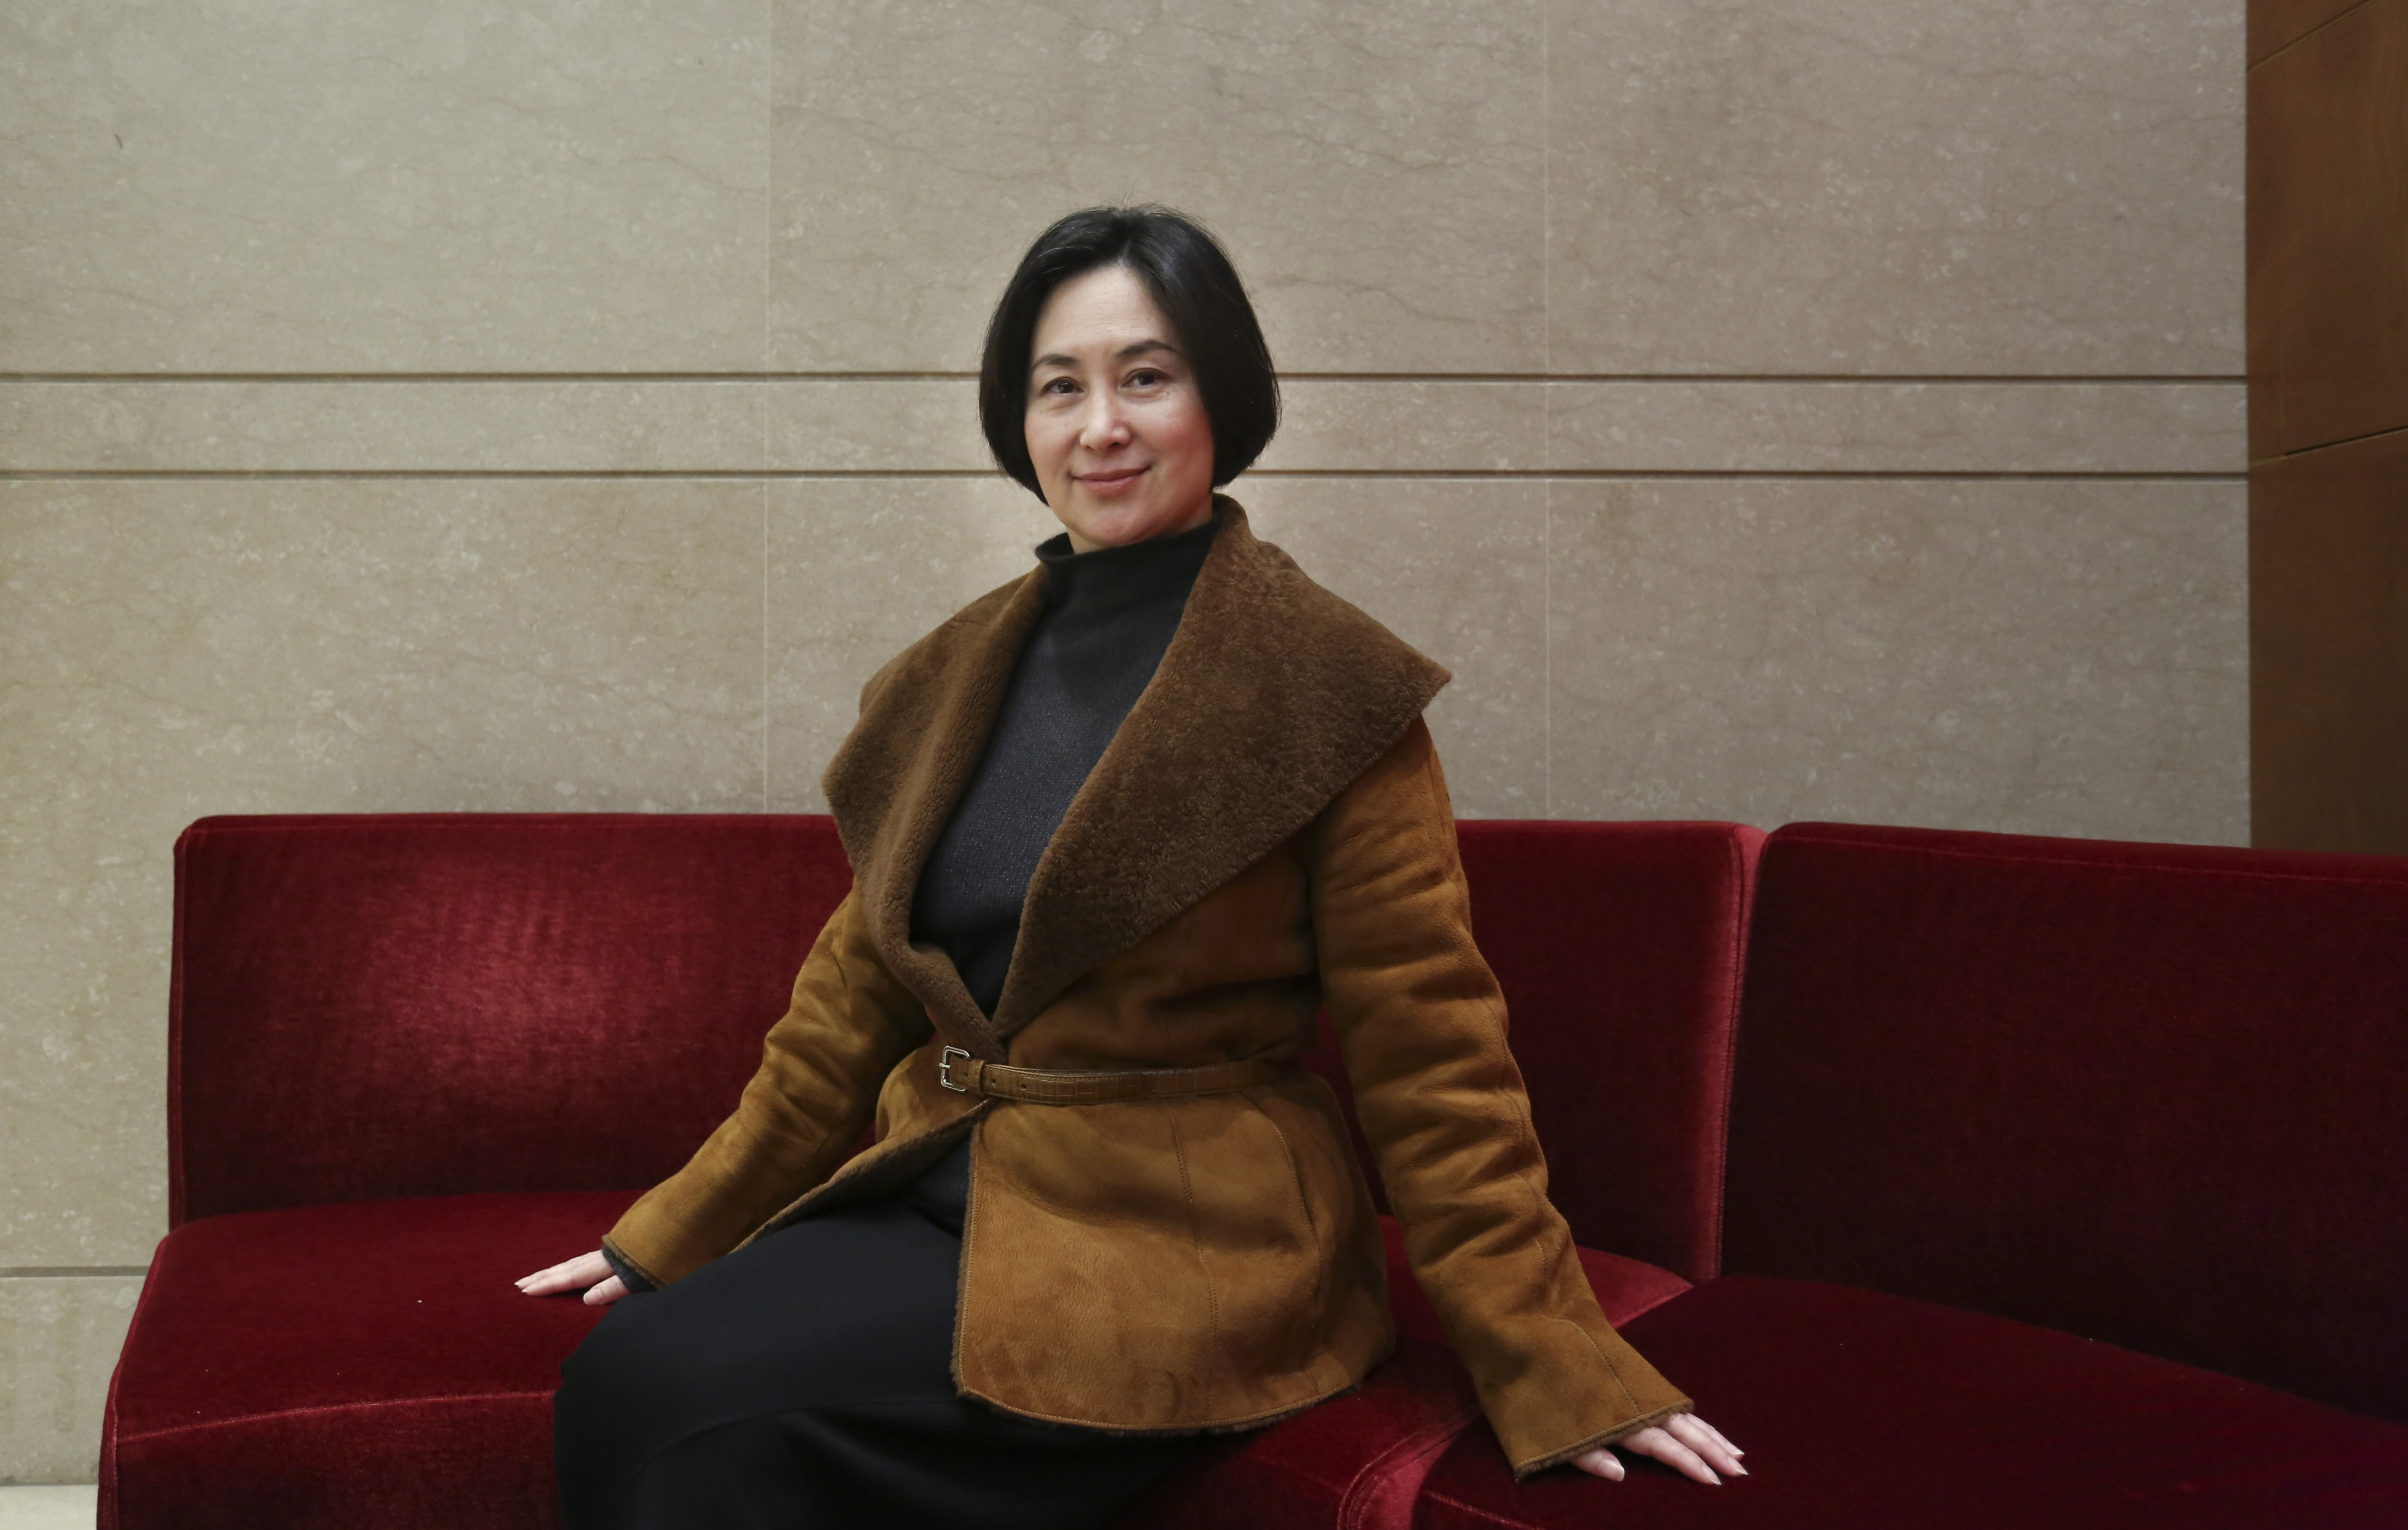 Co-chairperson of MGM China Holdings, Pansy Ho Chiu-king, poses for a photograph in Hong Kong on March 08, 2017.  08MAR17  [FEATURES]   SCMP / Jonathan Wong